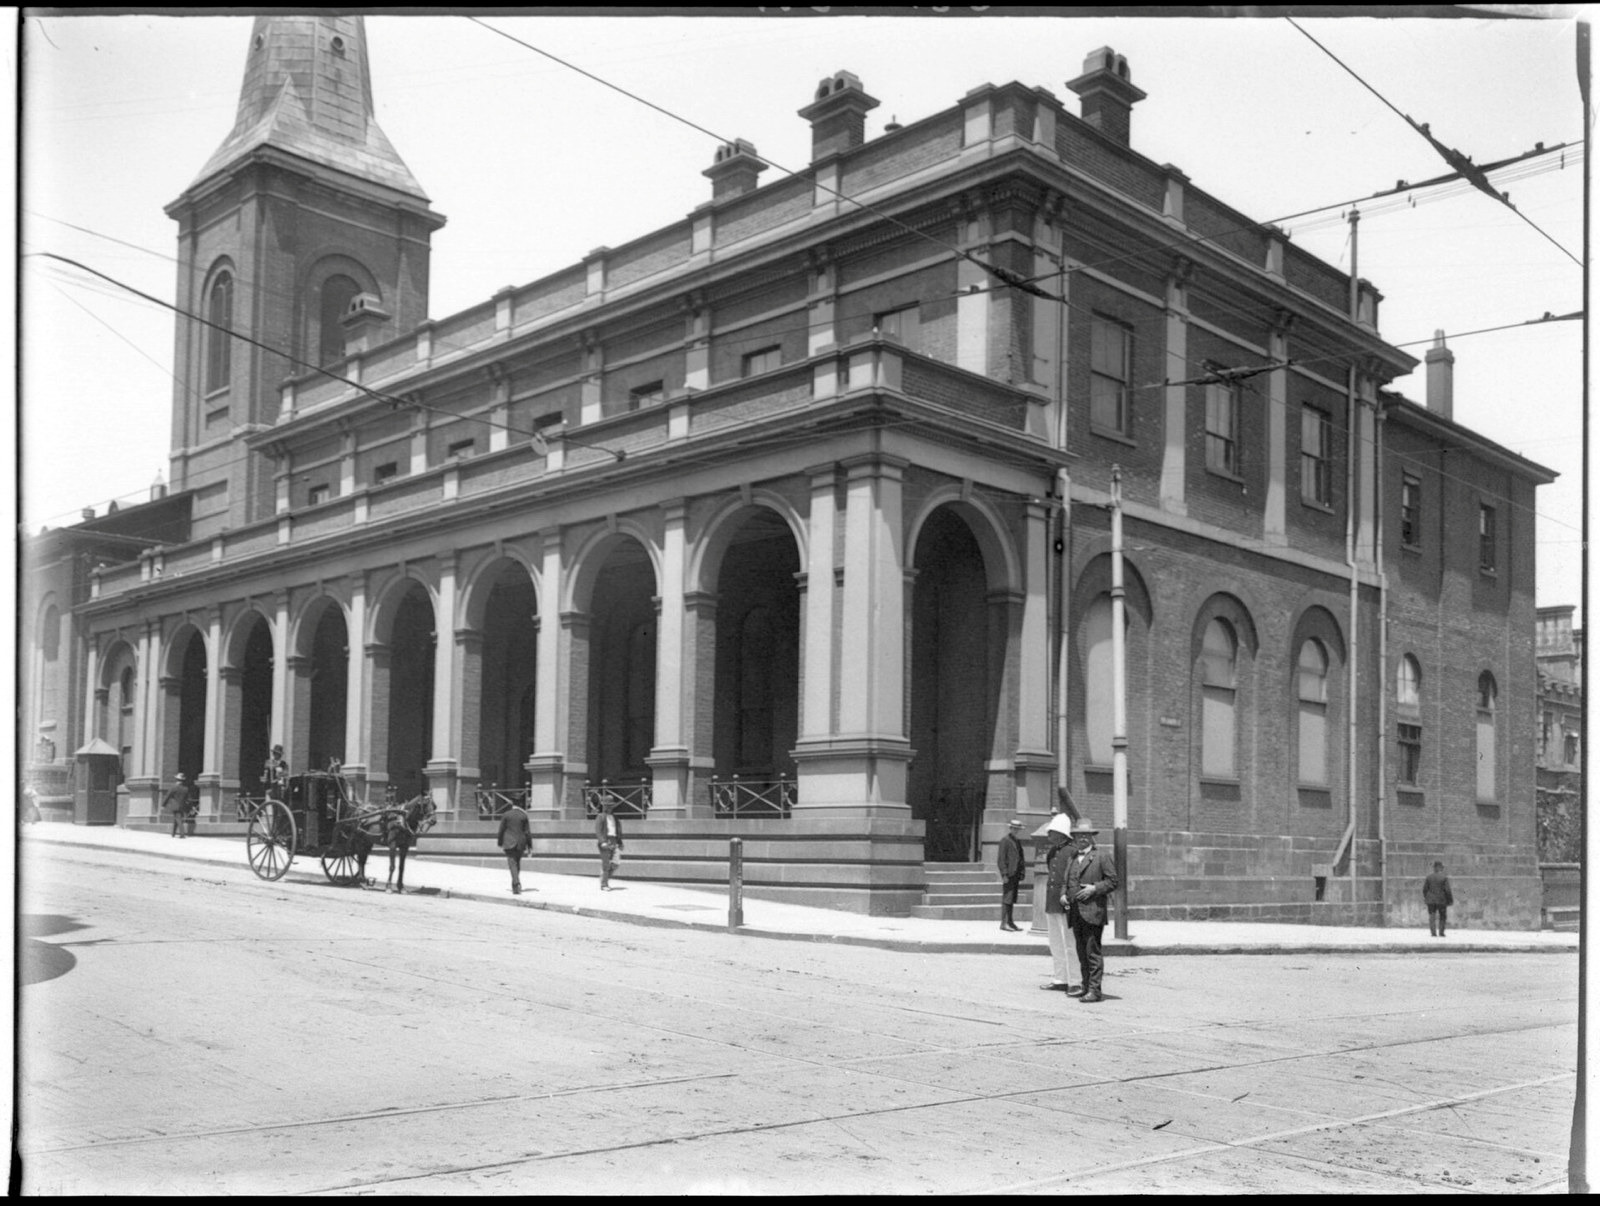 Government Printing Office; NRS 4481, Glass negatives. NRS-4481-3-[7/15883]-M2439 | Government Printing Office 1 - 30700 - Supreme Court, King and Elizabeth Streets, Sydney [From NSW Government Printer series: City Views]